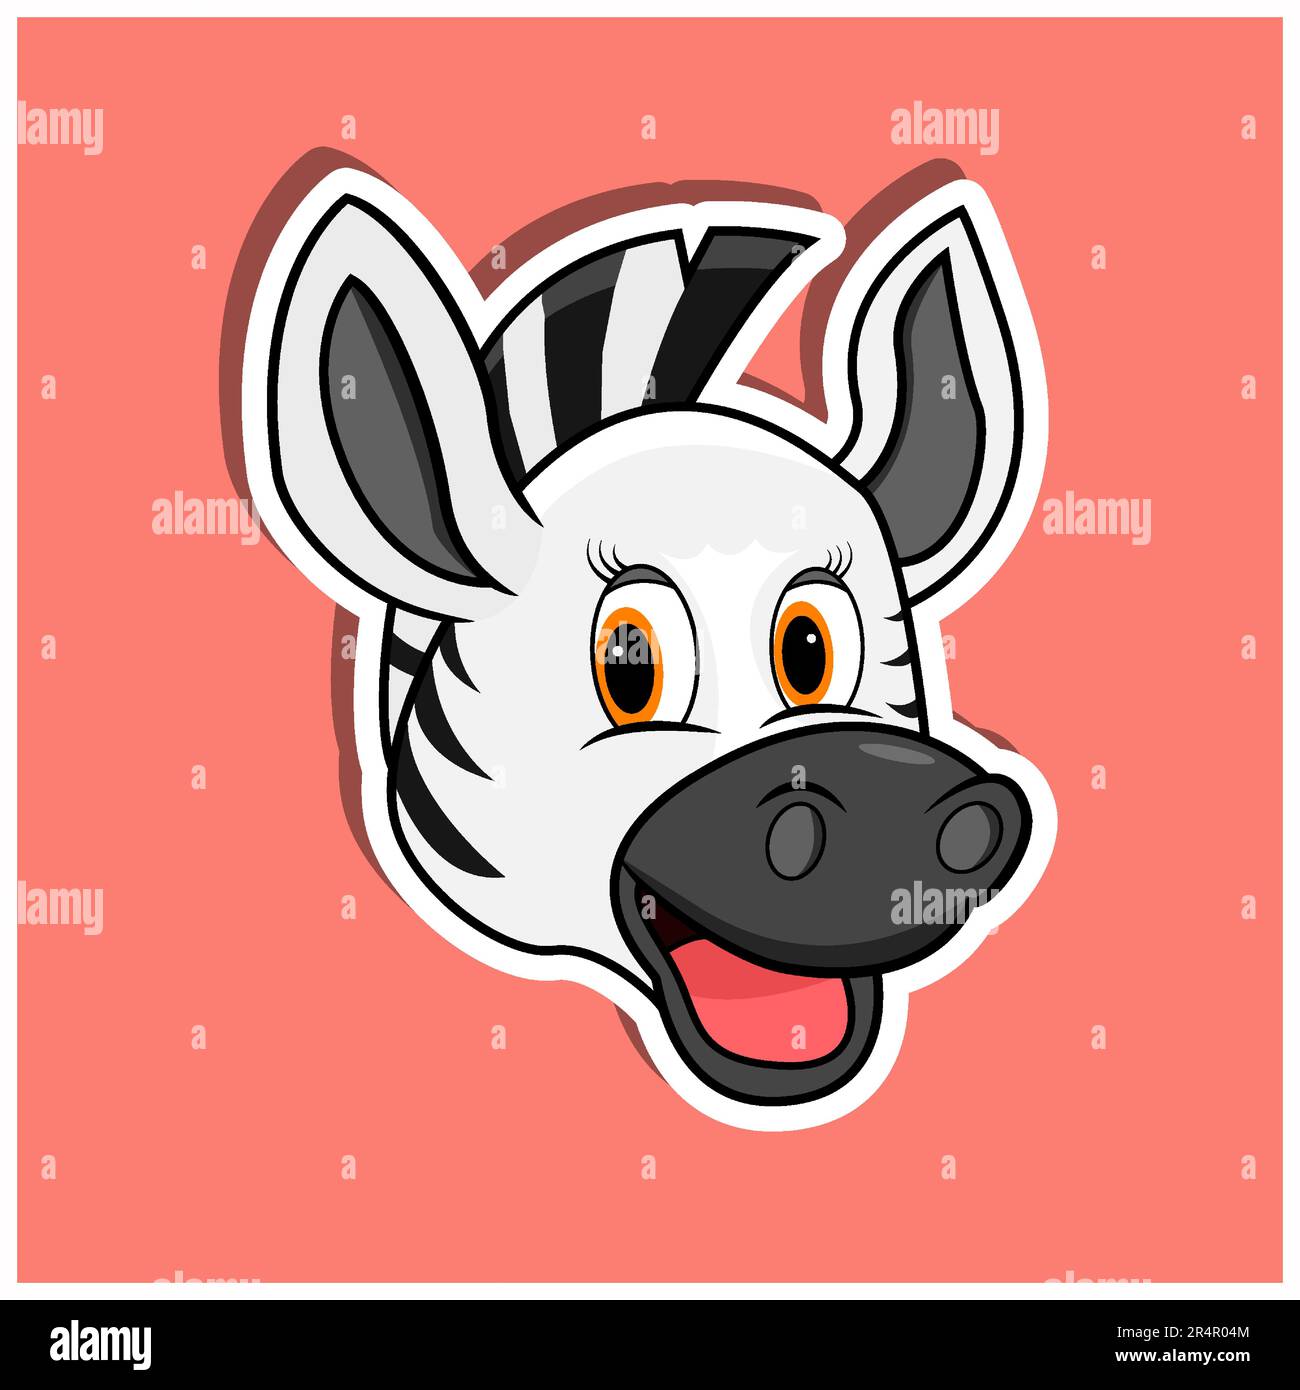 Animal Face Sticker With Zebra Character Design. Vector and Illustration Stock Vector